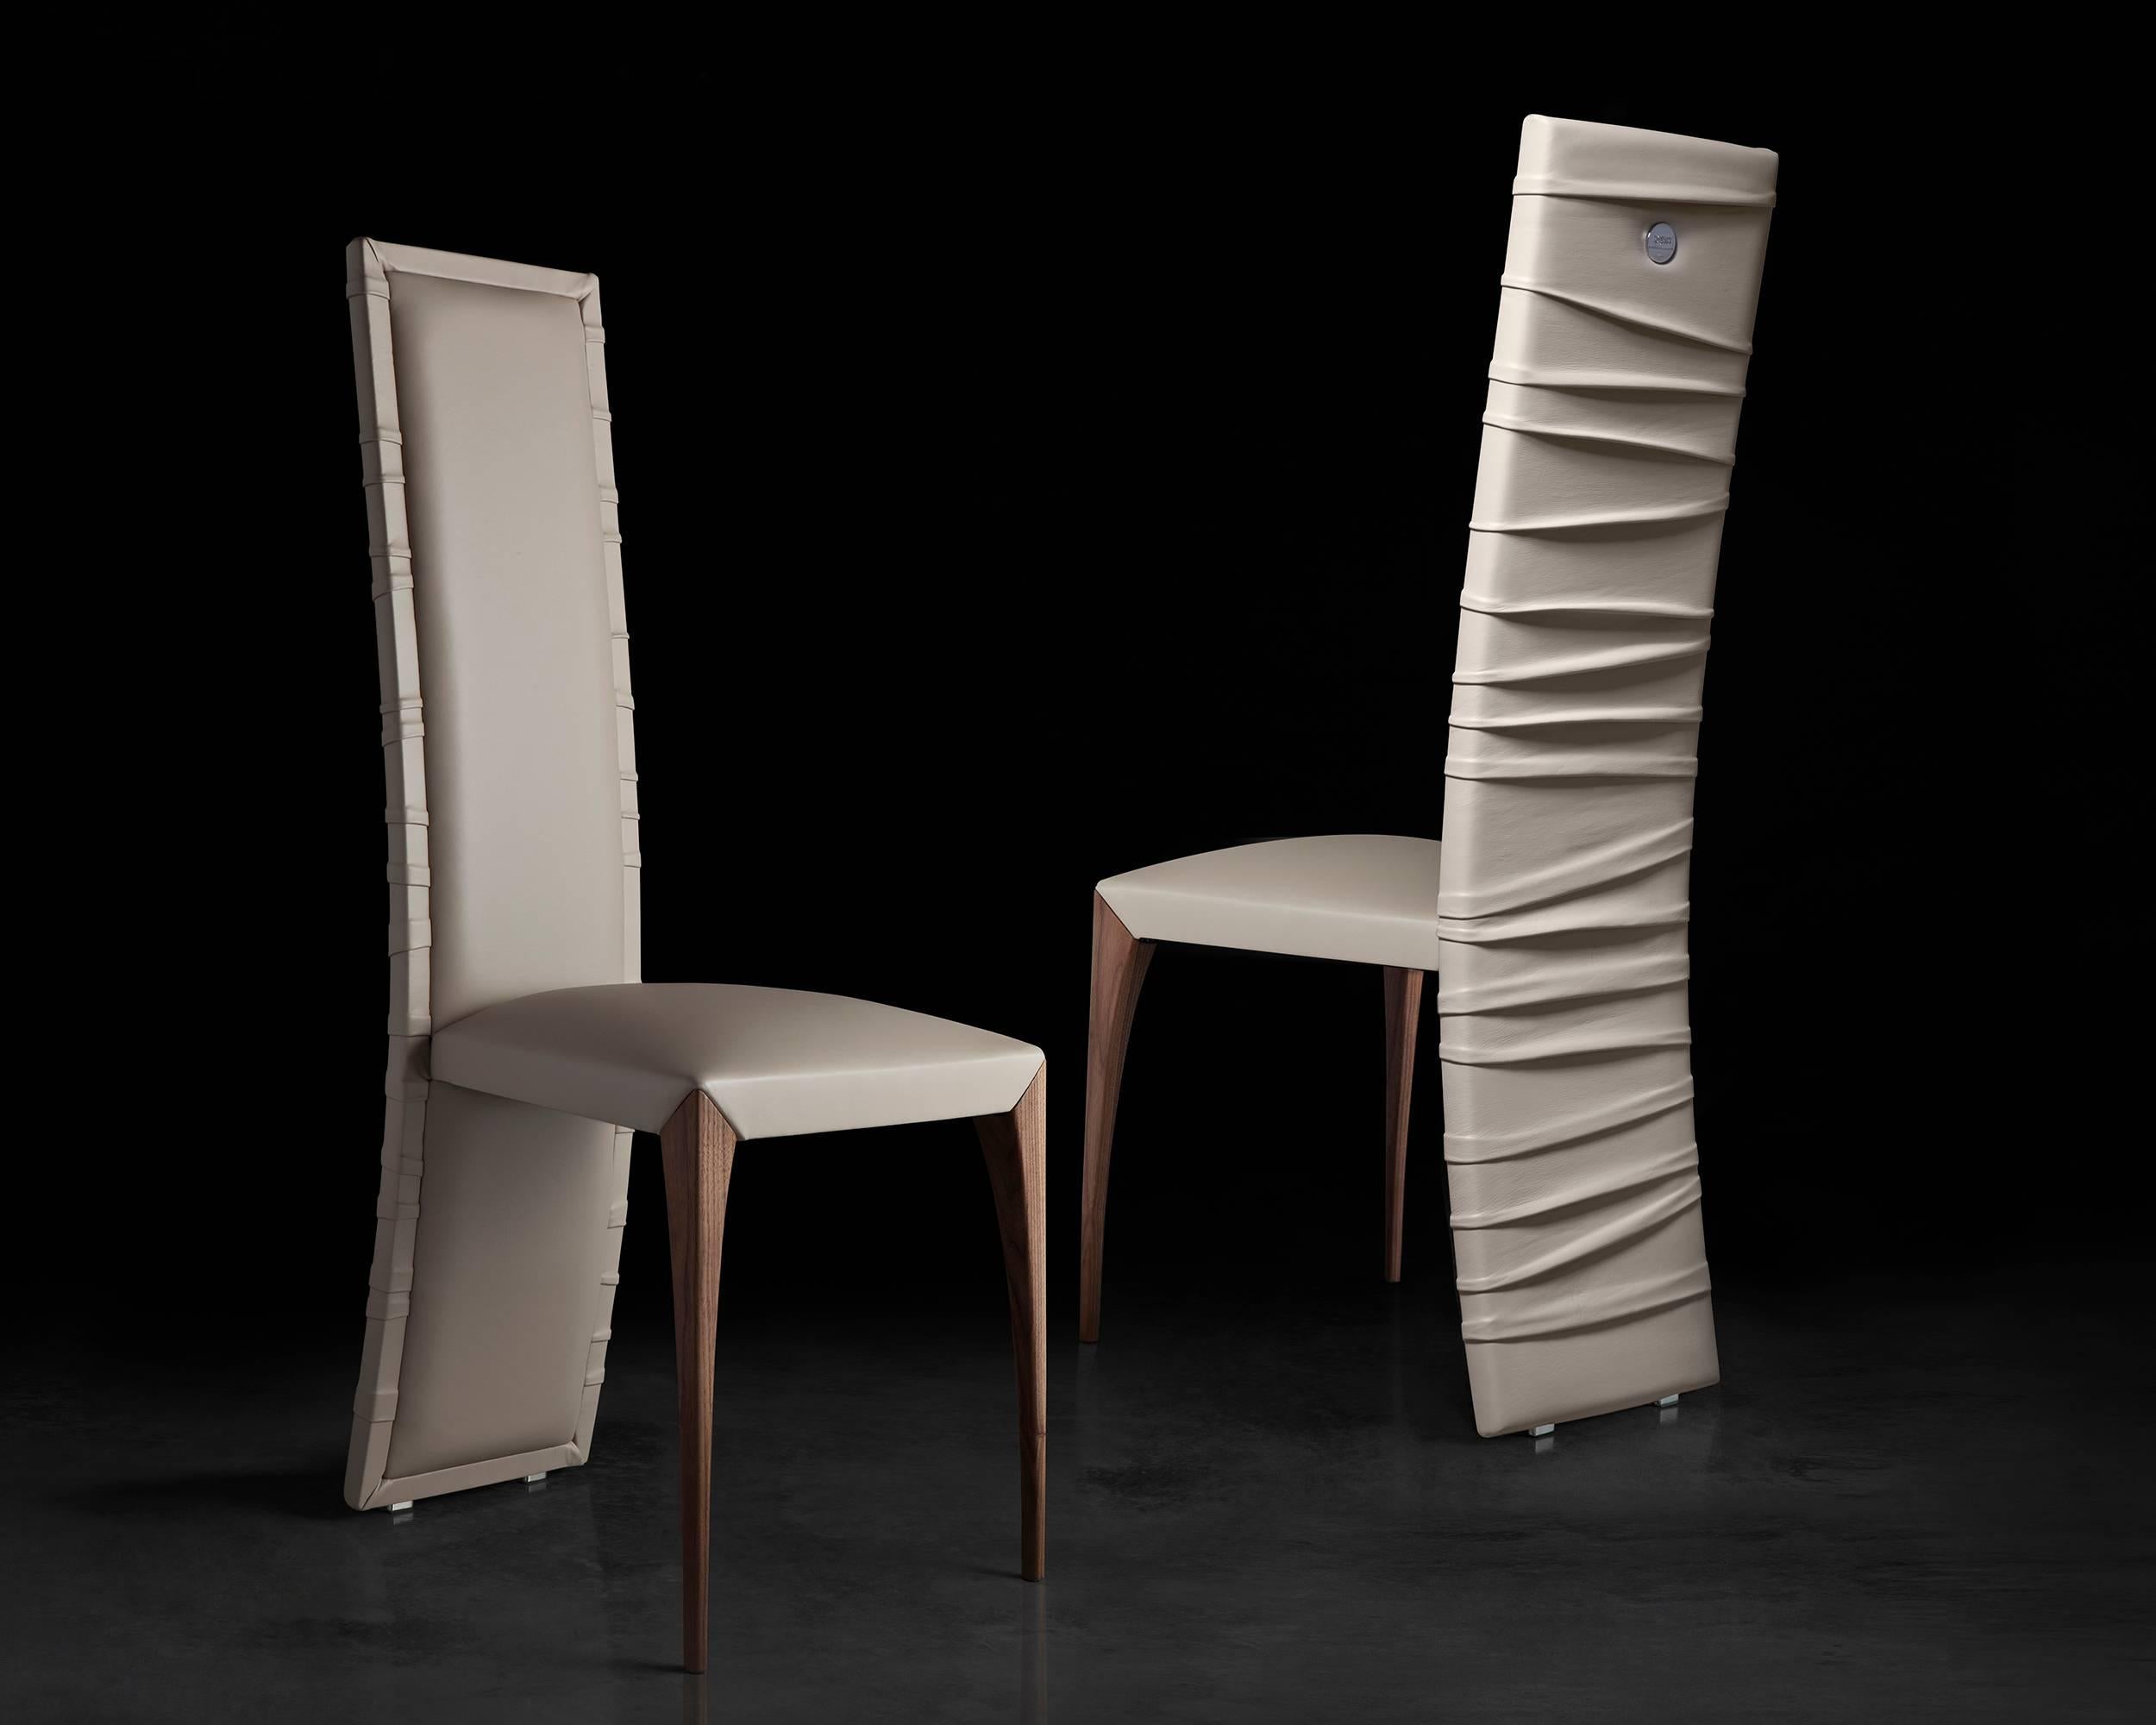 Sinuous folds envelop the elegant structure of Il Pezzo 7 Chair. Expertly upholstered in high- quality leather or velvet by master craftsmen, it boasts a rich, soft backrest, wrapped in its graceful folds. The seat features a solid wood base with a